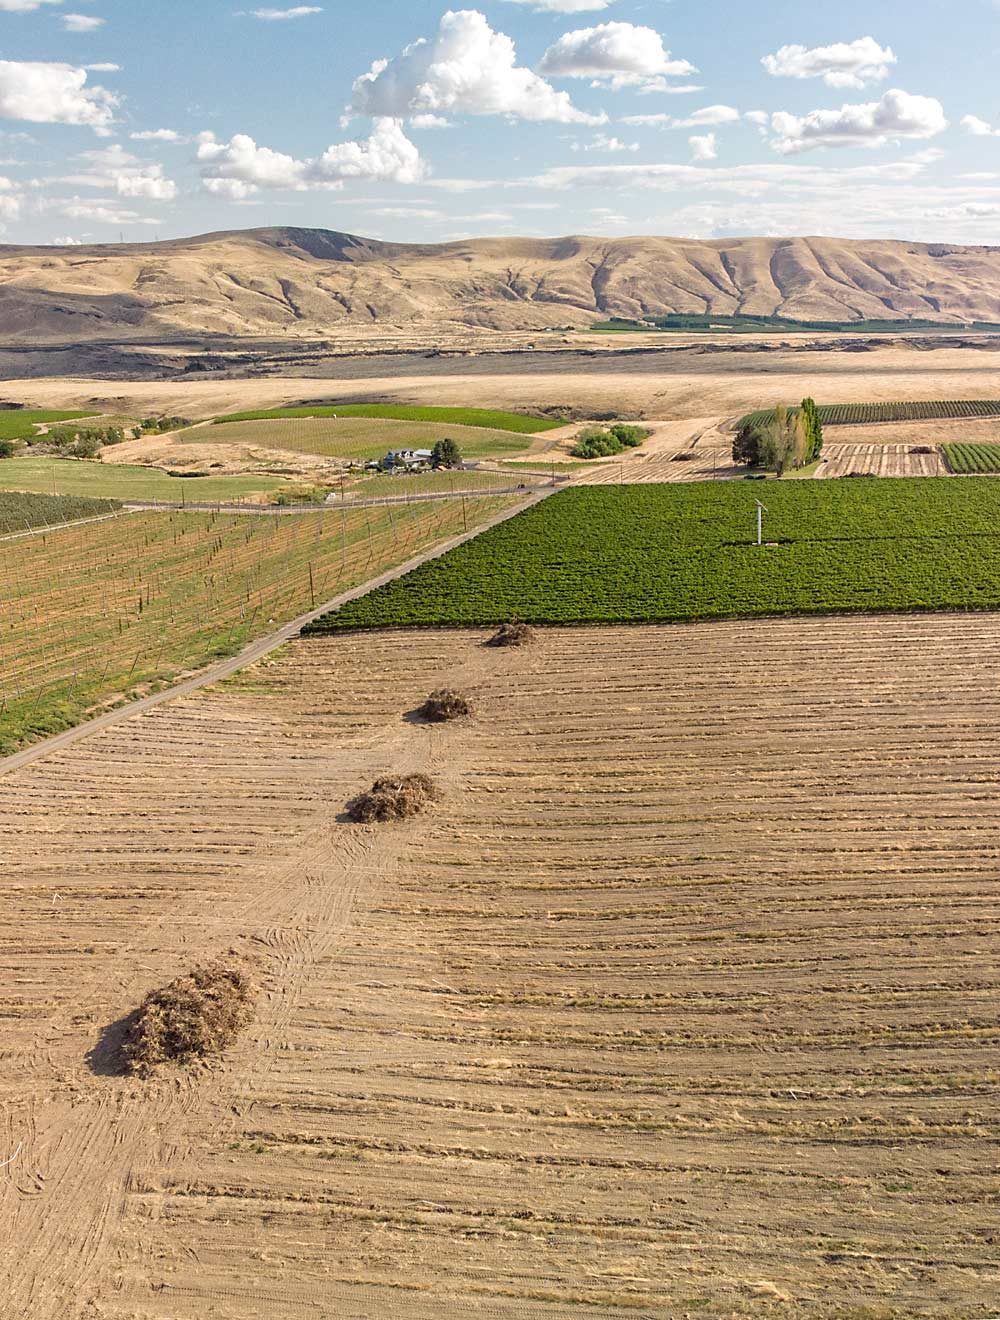 An unrenewed contract led Olsen Brothers Ranches near Benton City, Washington, to pull these Syrah grape vines. A Merlot block stands intact beyond that, but in the far distance, Cabernet Sauvignon blocks have also been pulled. (TJ Mullinax/Good Fruit Grower)